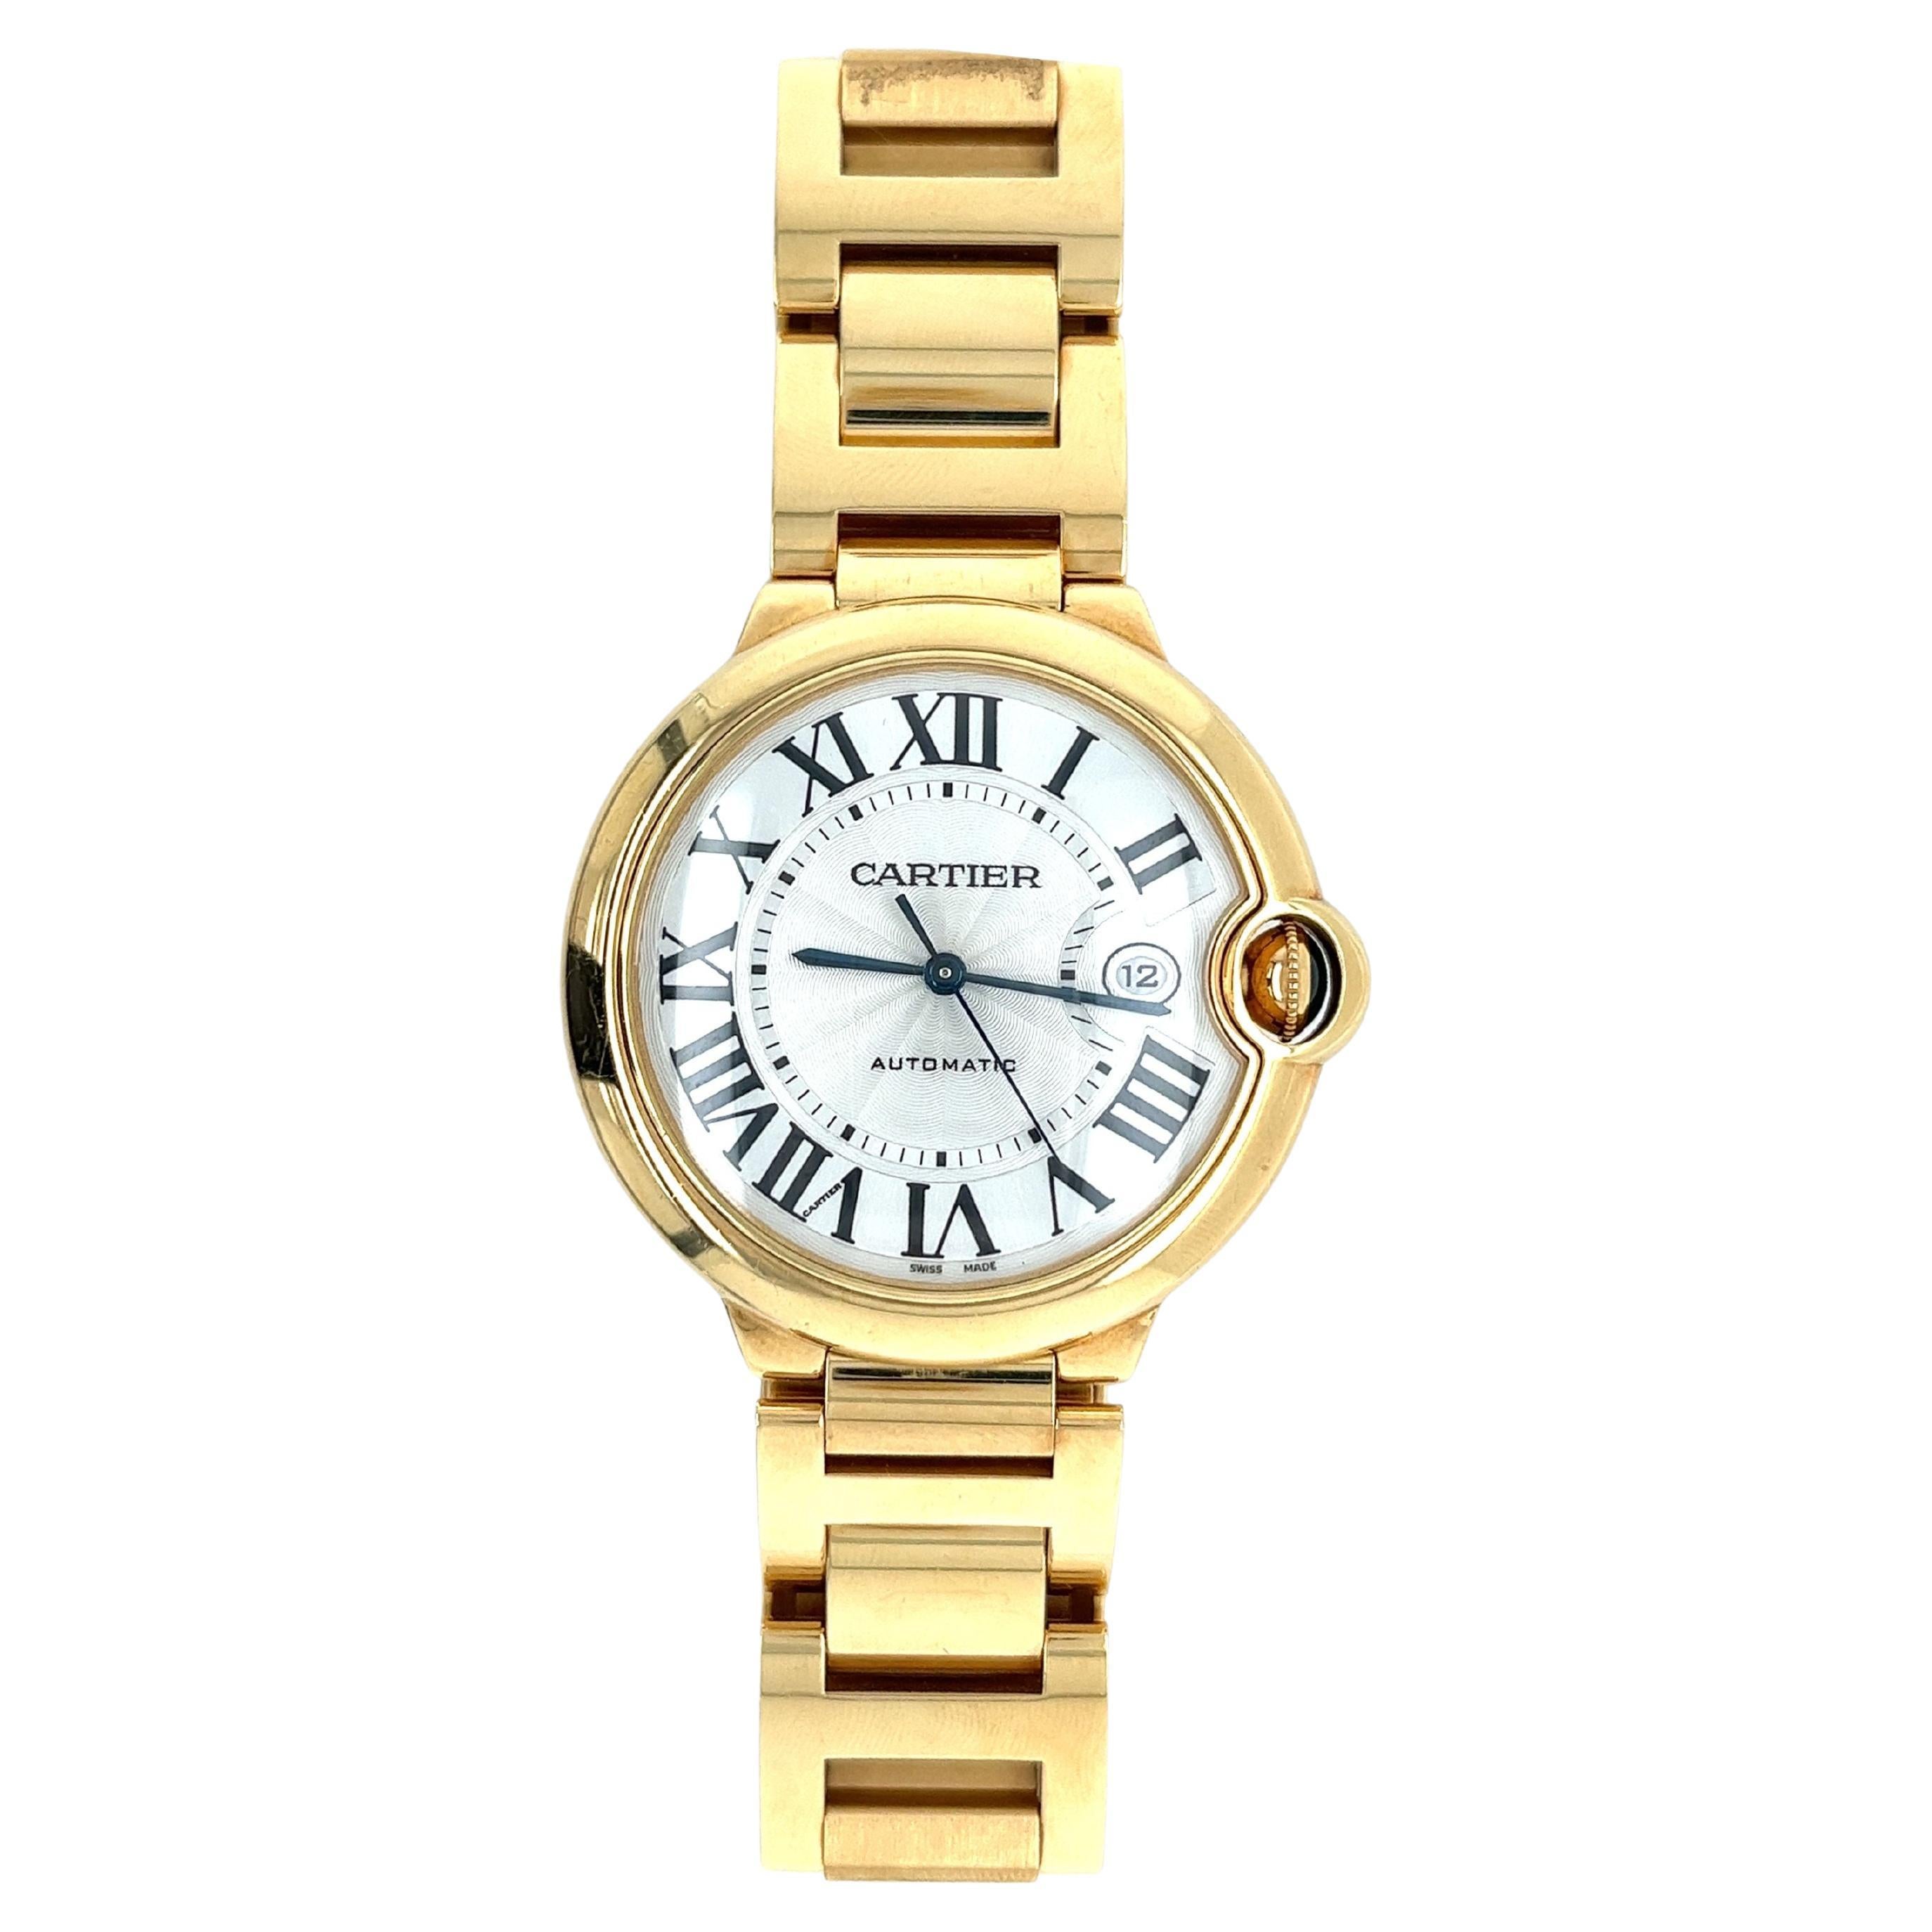 Cartier Ballon Bleu Jumbo Large Size Mens Watch in 18k Gold with Box/Papers en vente